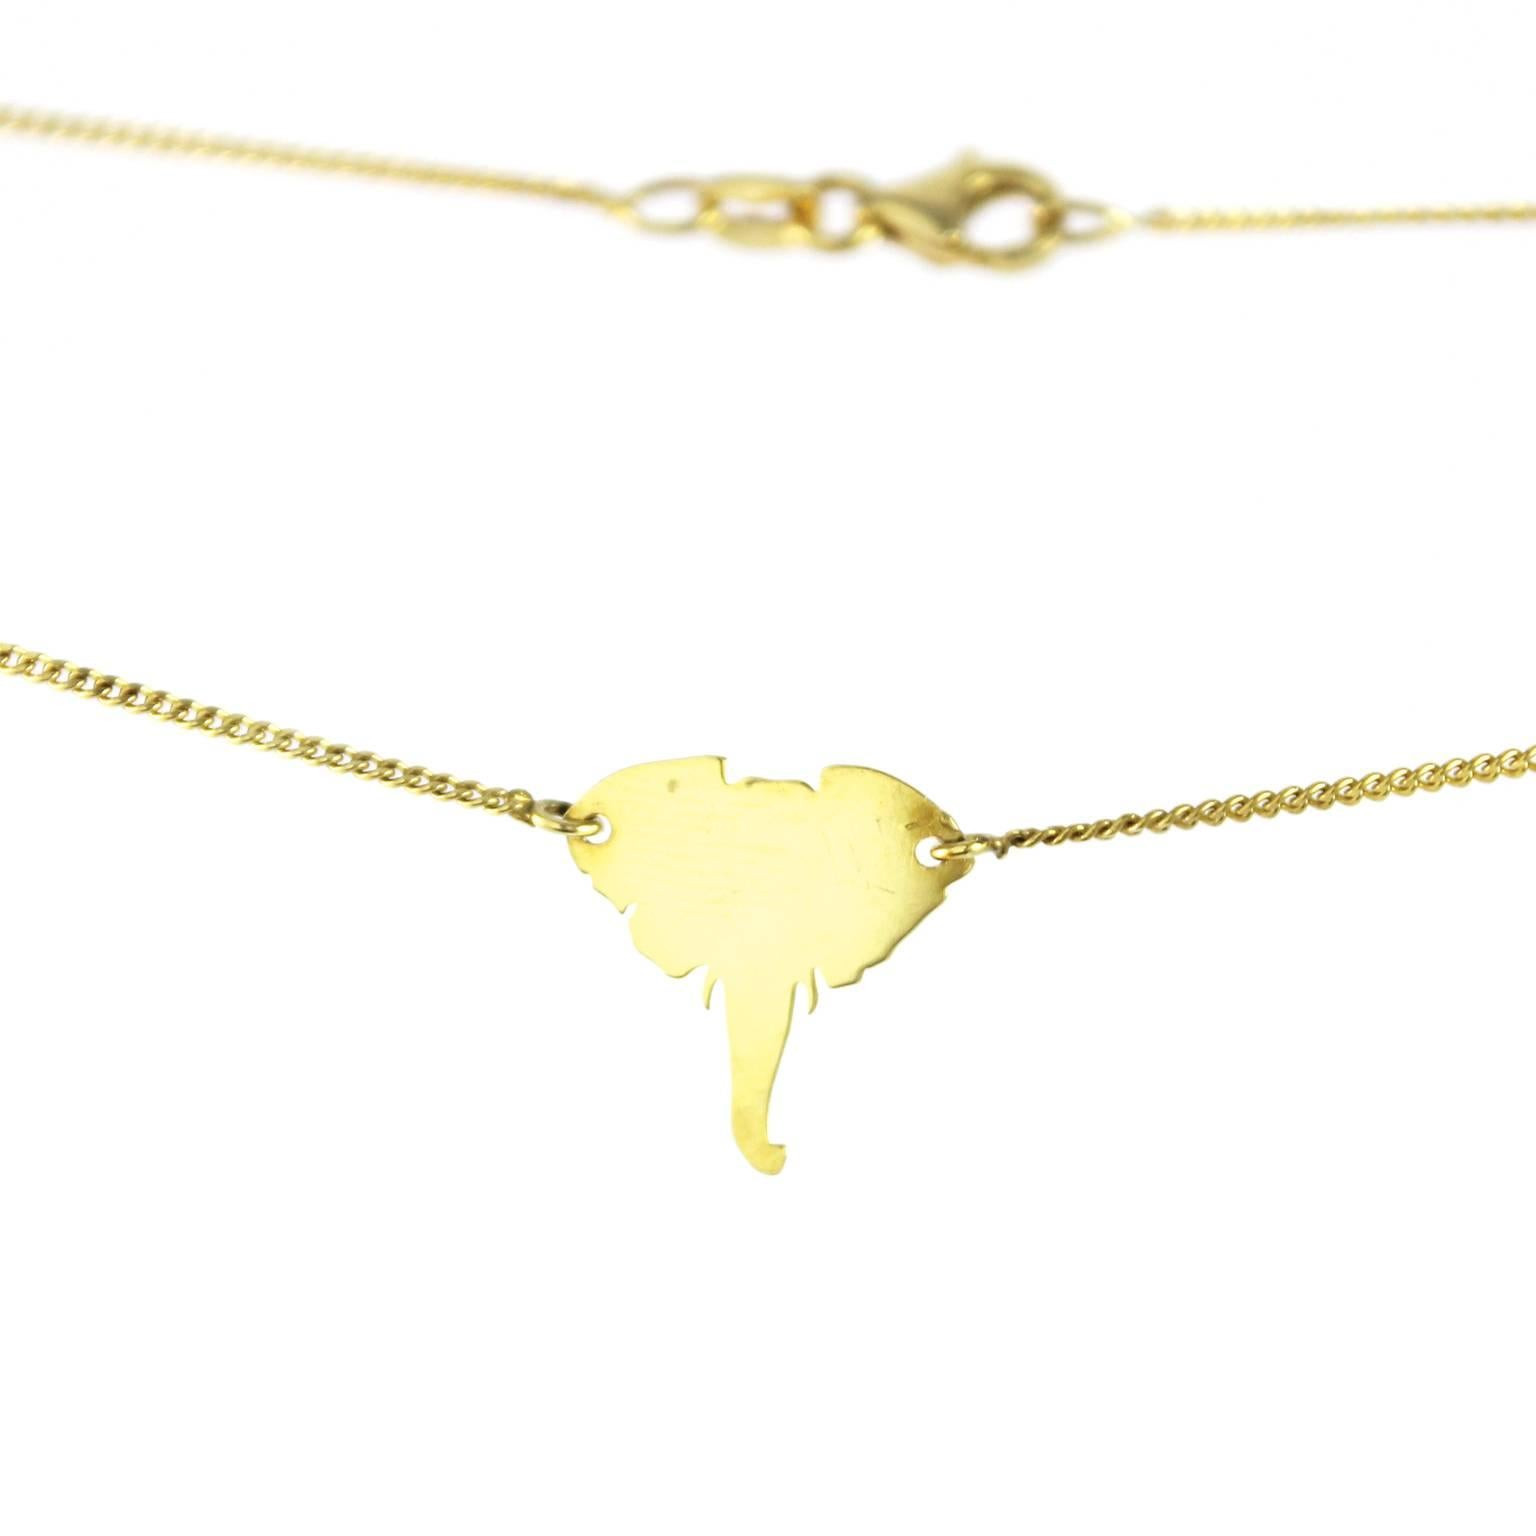 This NiNi necklace combines simple elegance with a sleek, modern look.  The delicate NiNi elephant head is lovingly crafted from 14 karat gold.   The 42 centimeter chain is and the clasp is made of 14 karat gold. 

This necklace is part of a